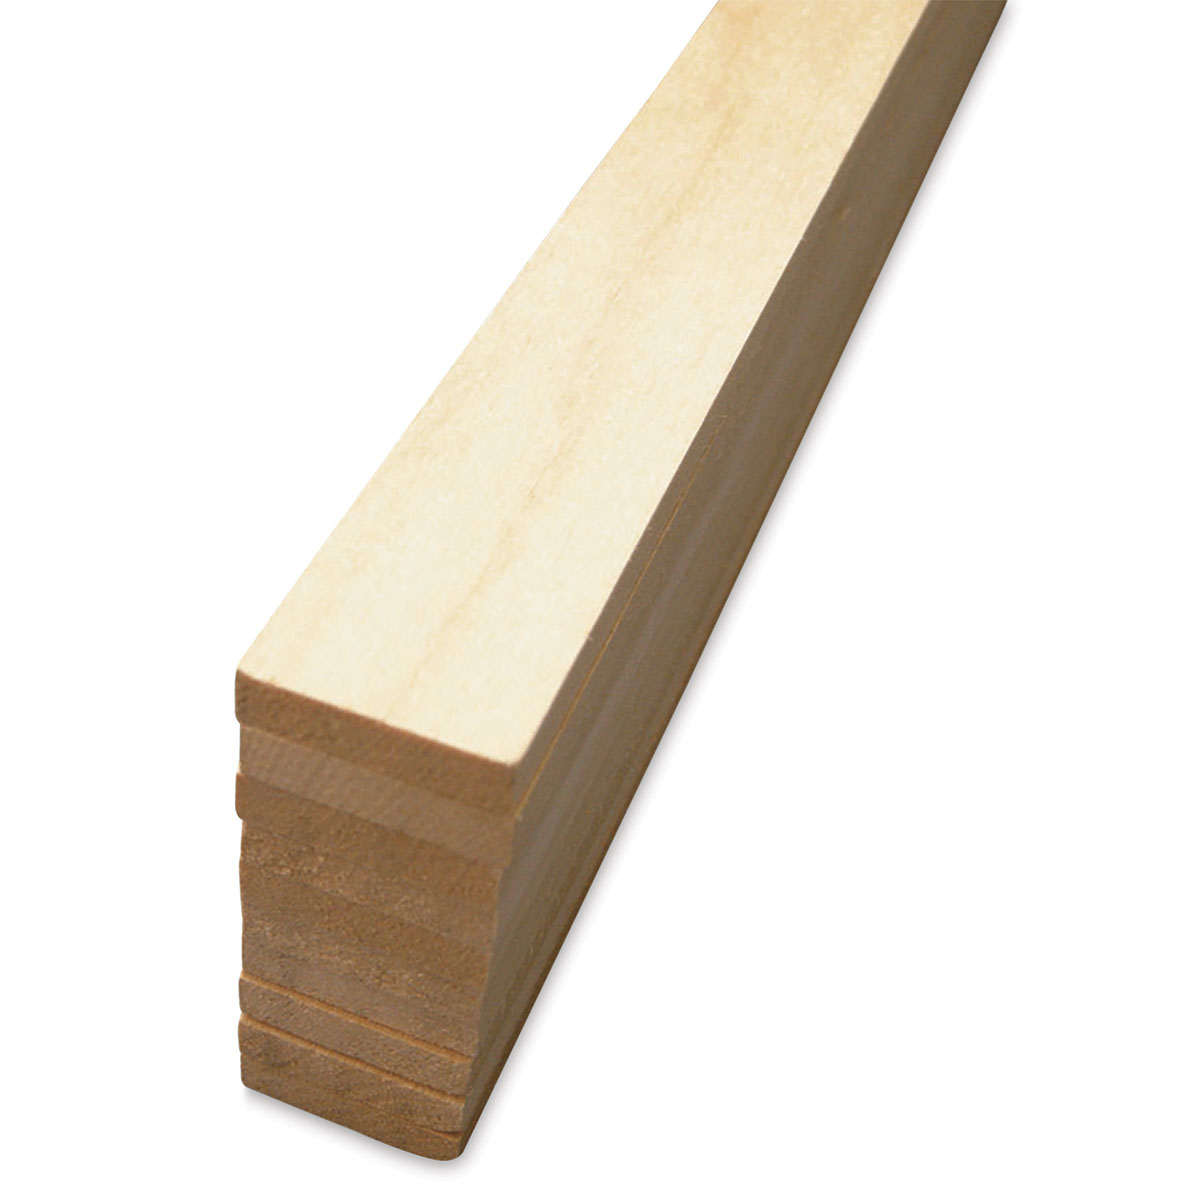 Midwest Products 4125 Basswood Sheet 1/16X6X24